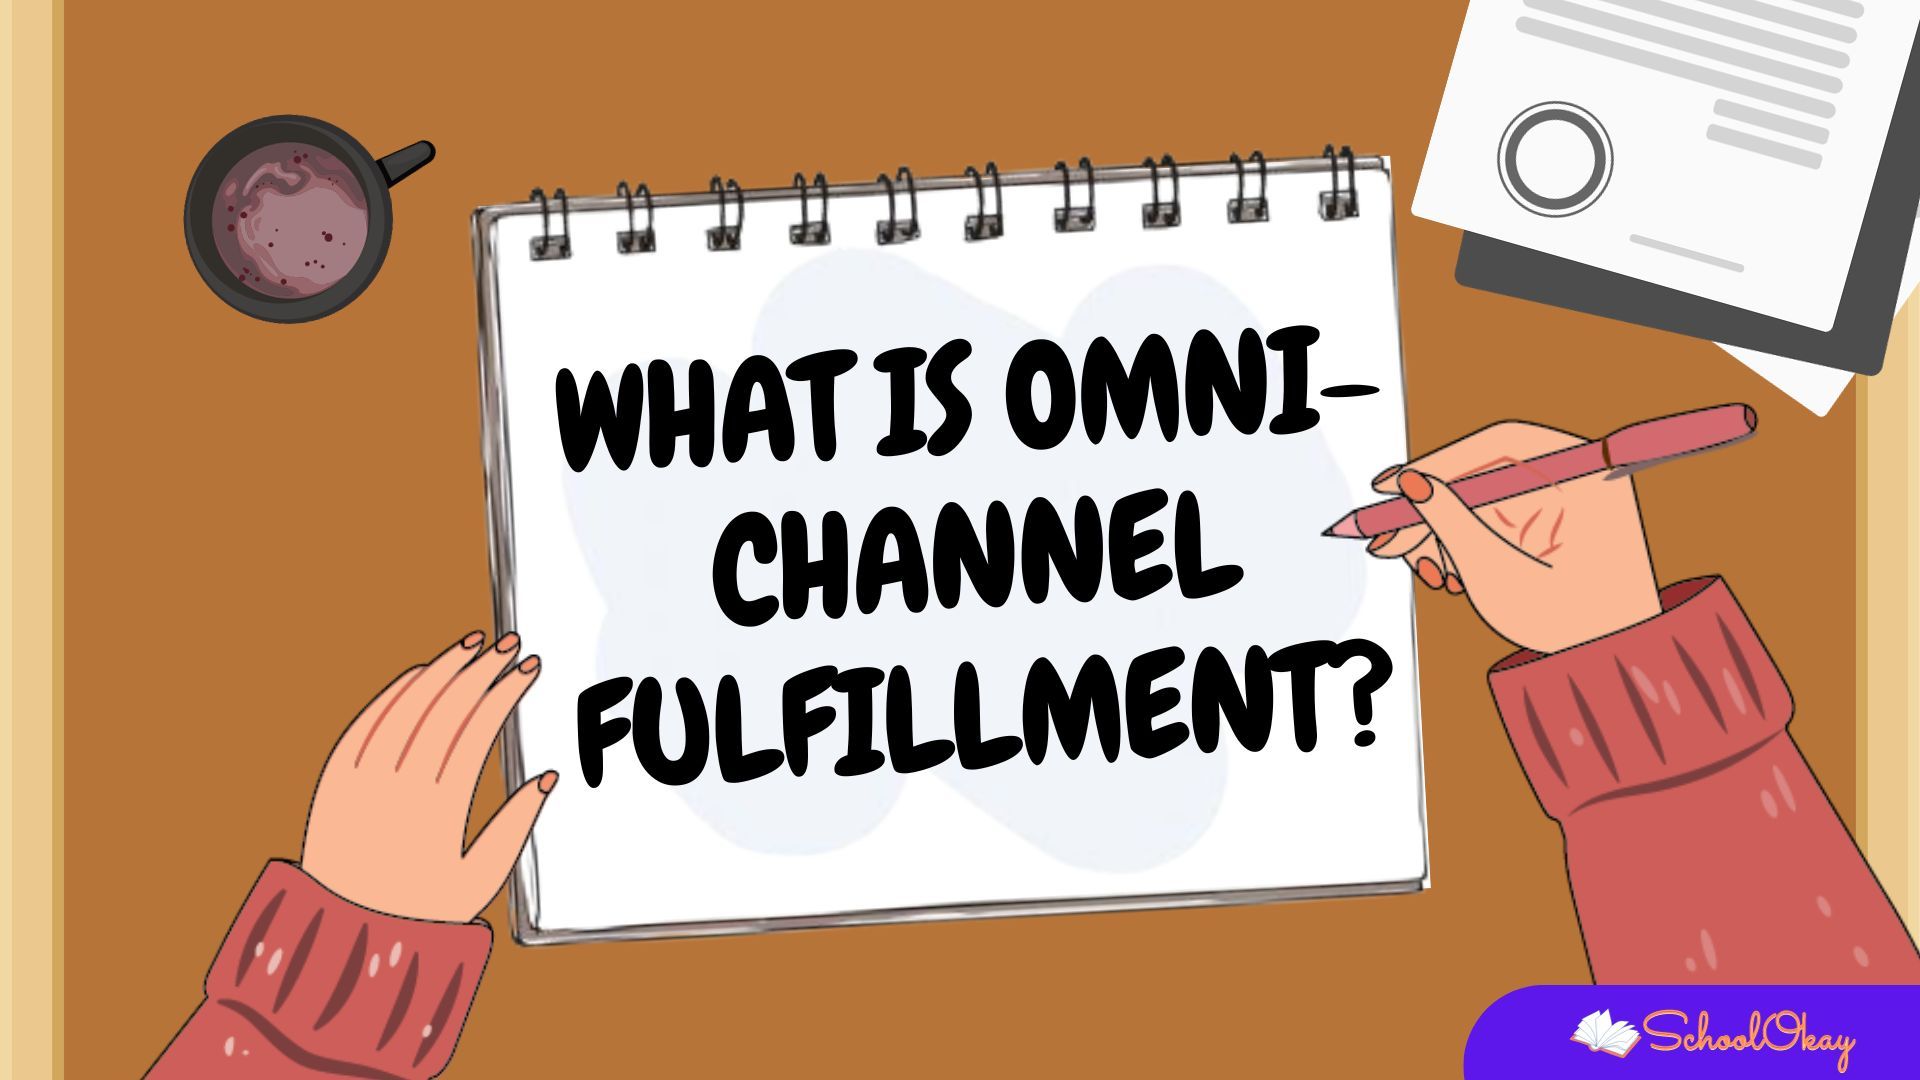 The Rise of Omni-Channel Fulfillment and its Impact on Distribution Networks